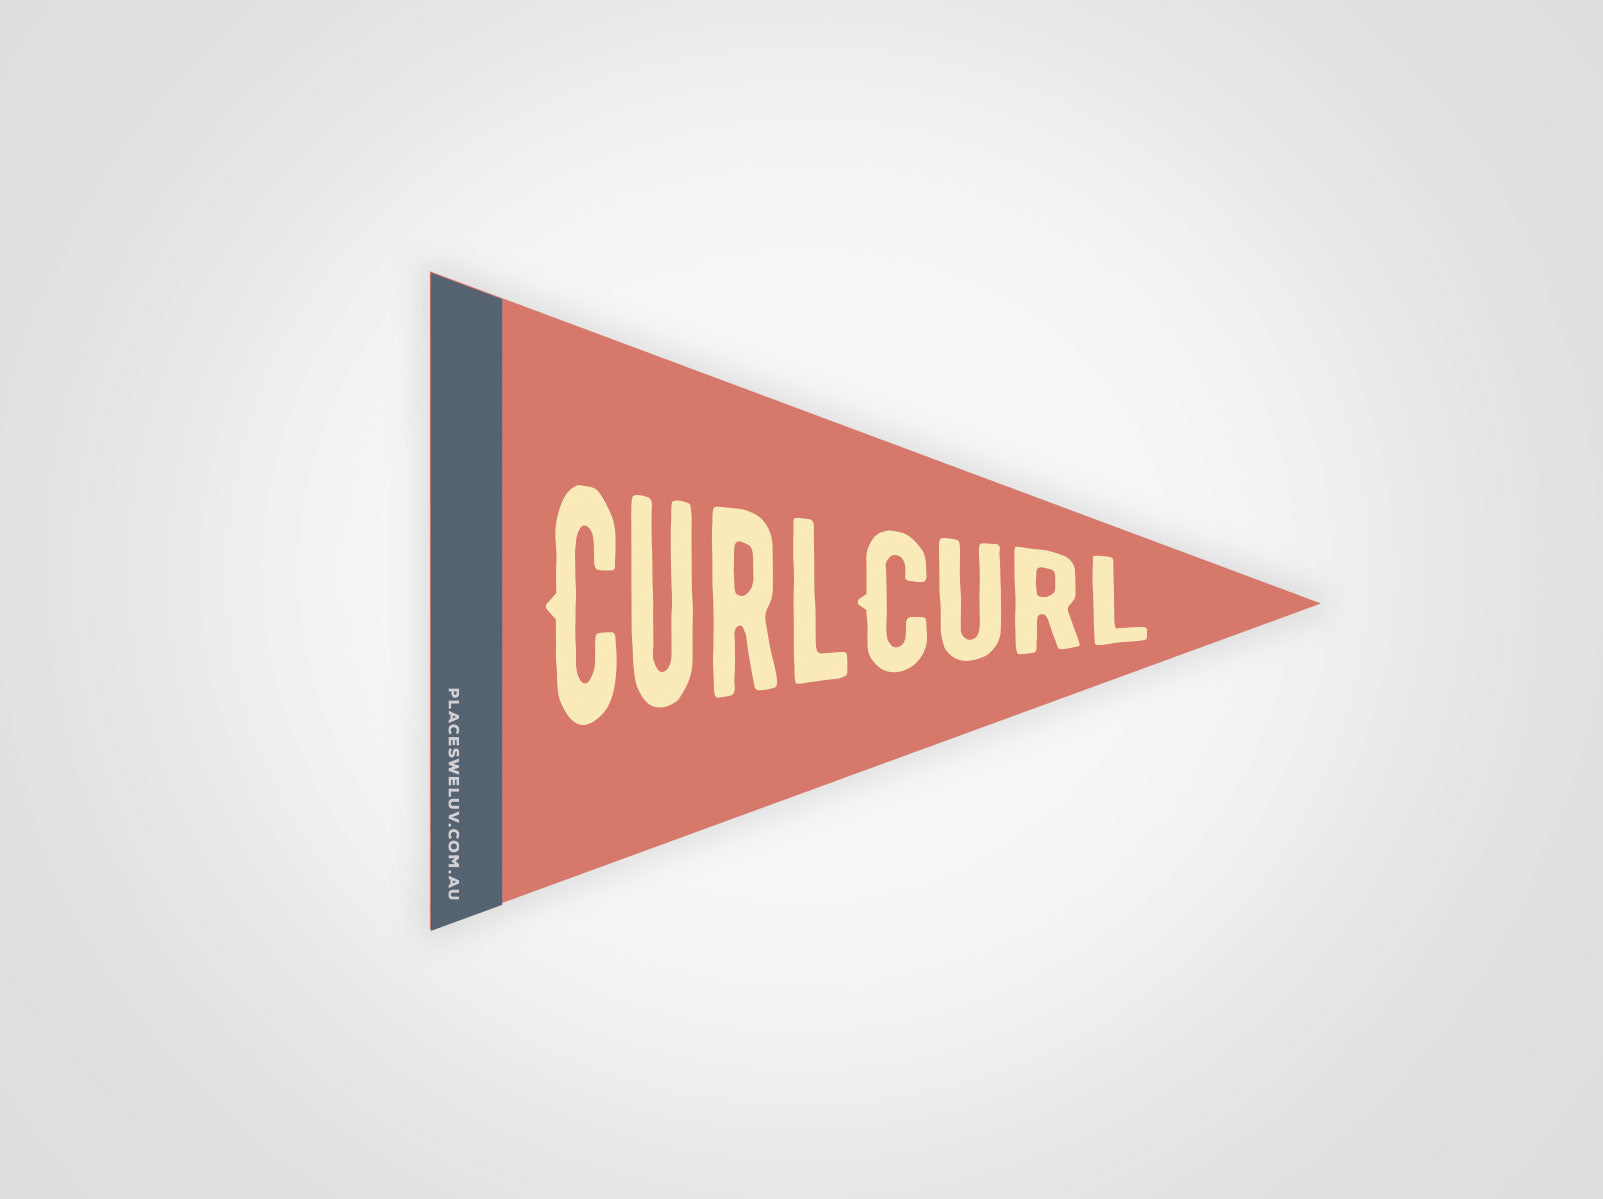 Curl Curl Vintage travel style Flag decal retro design by place we luv